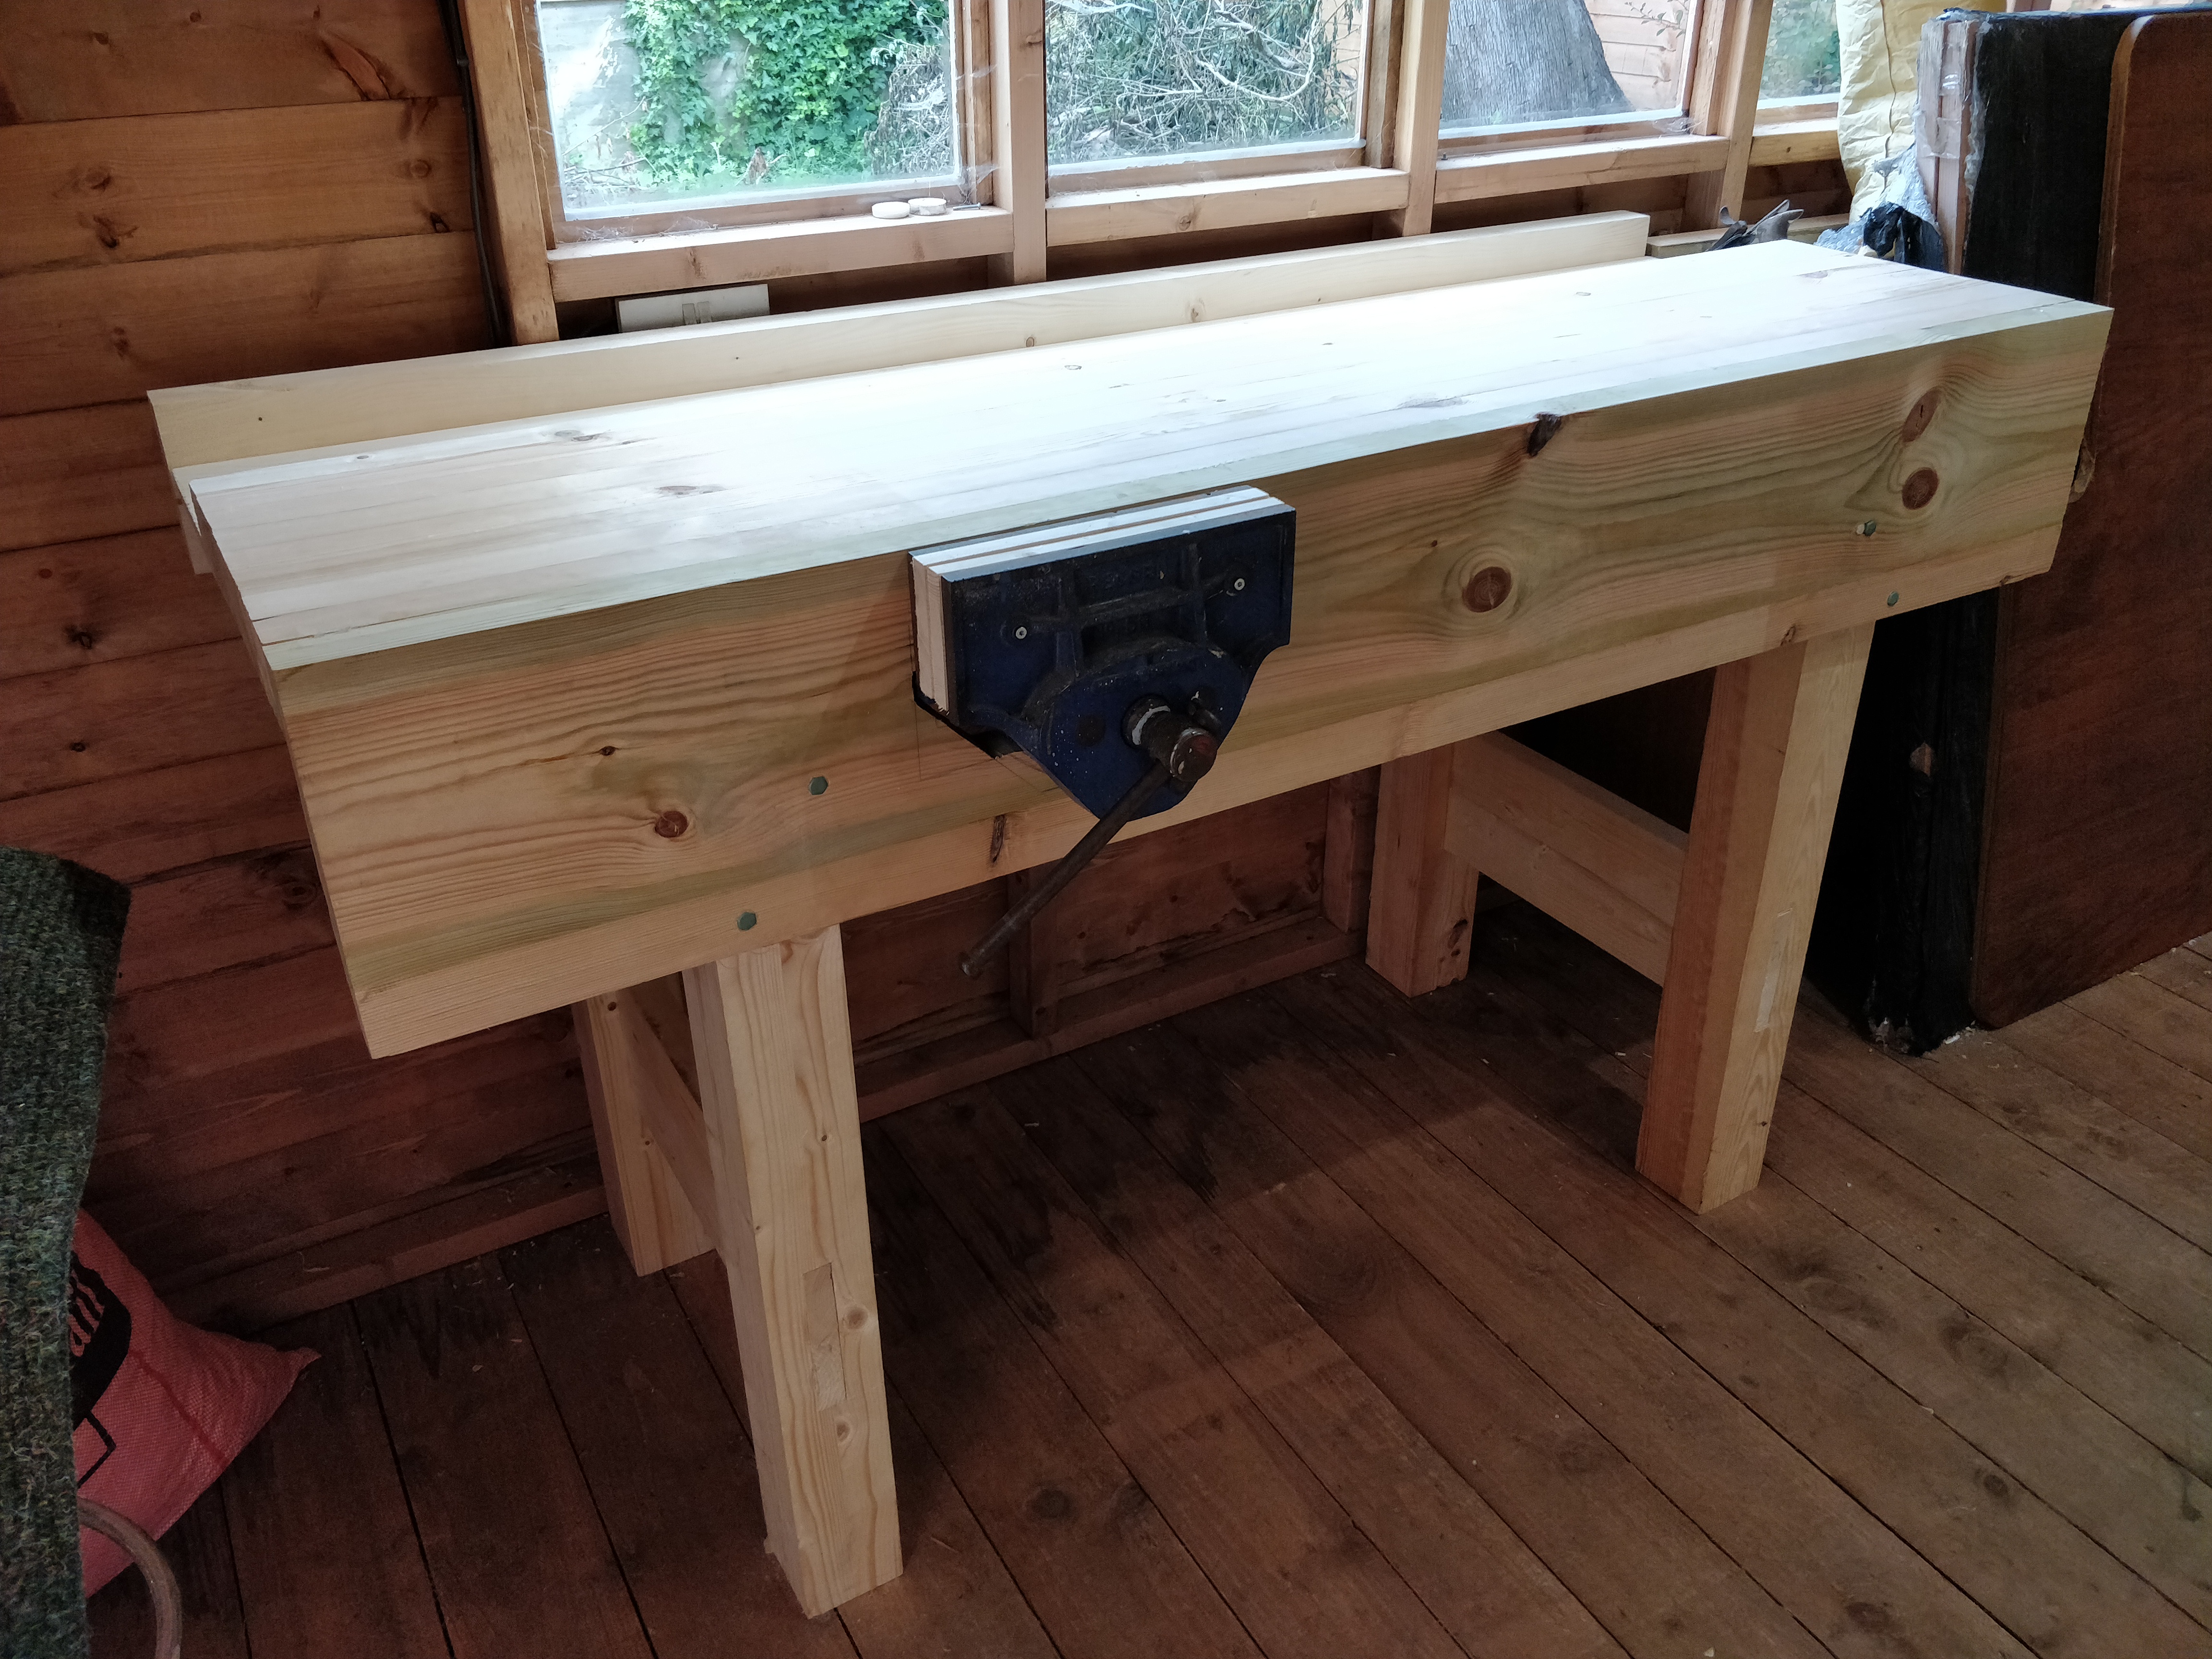 Workbench by Tomlawrence